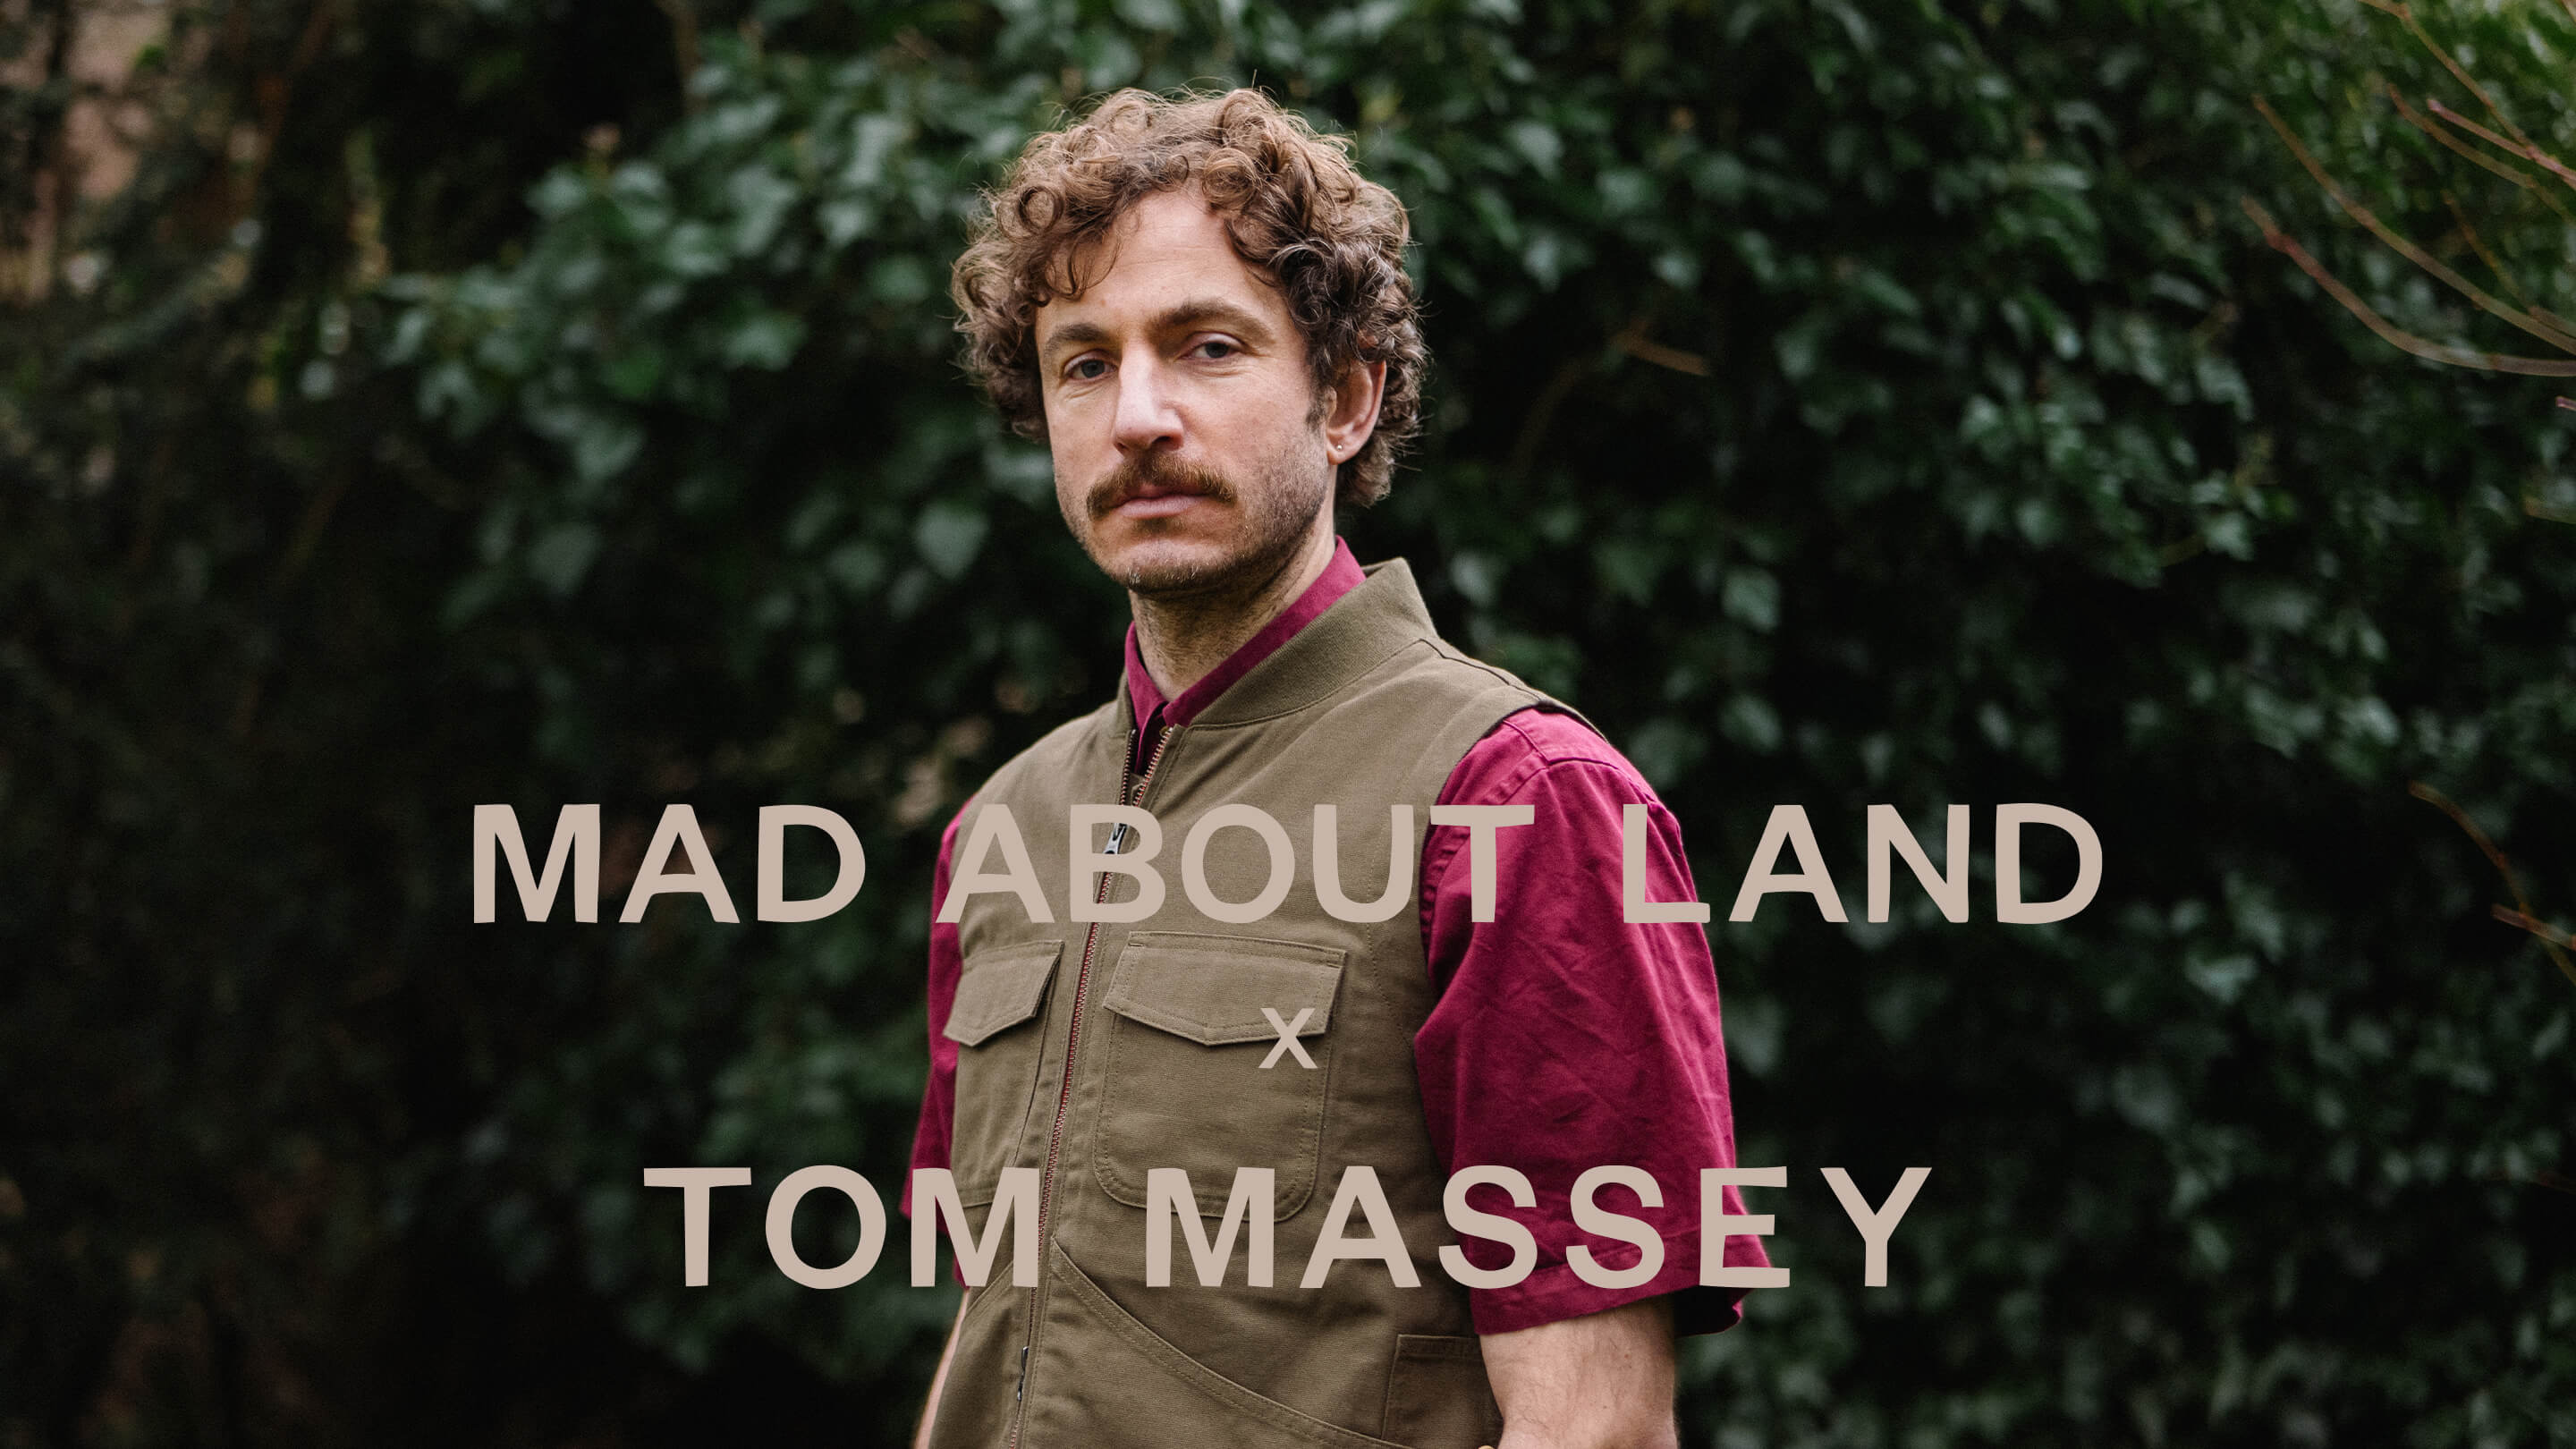 Tom Massey is Mad About Land